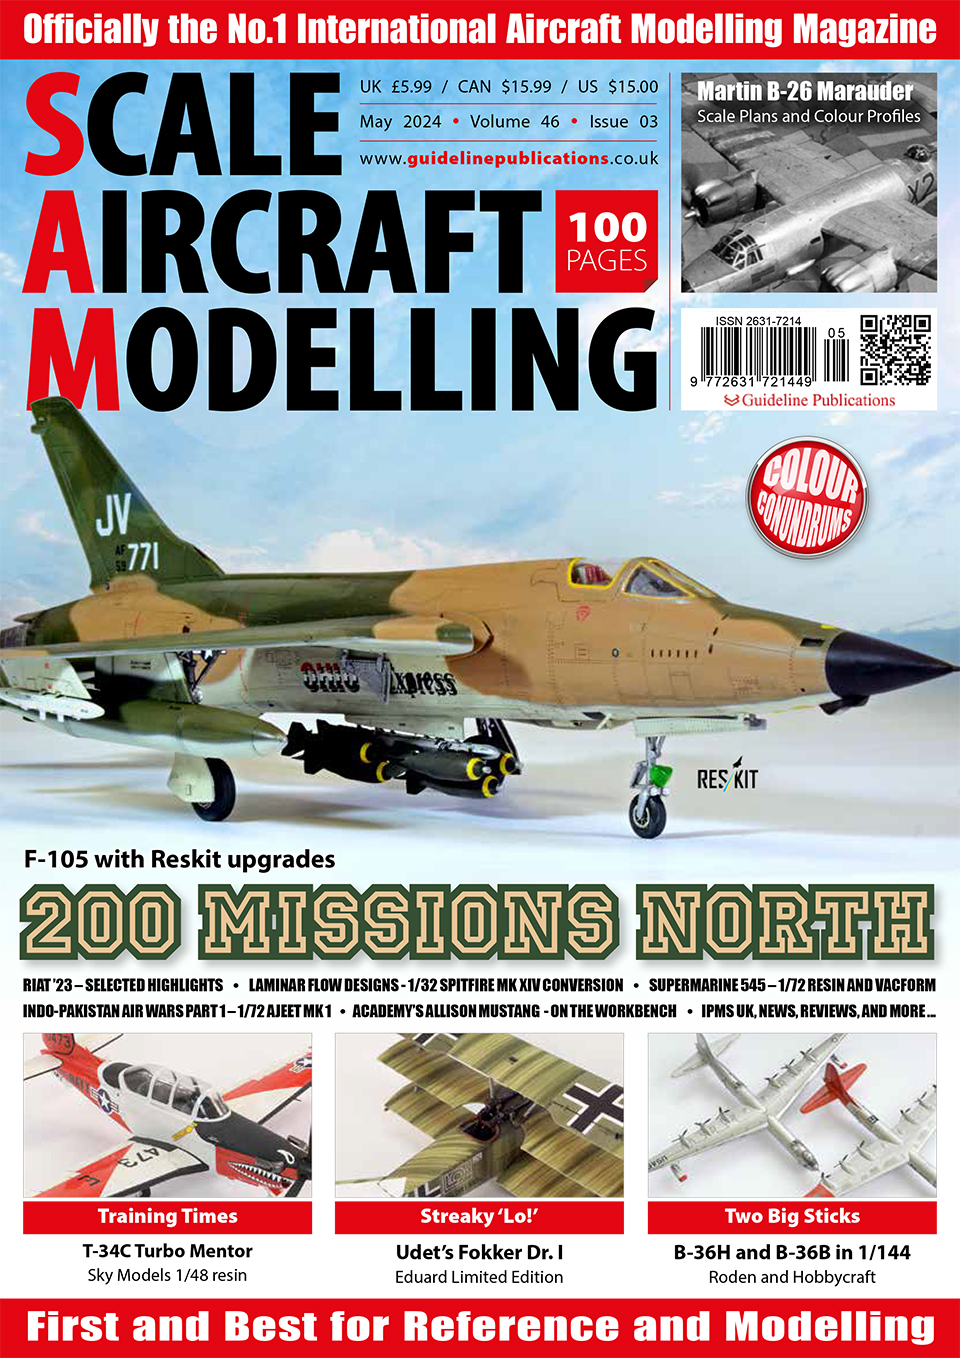 Guideline Publications Ltd Scale Aircraft Modelling May 24 Vol 46-03 